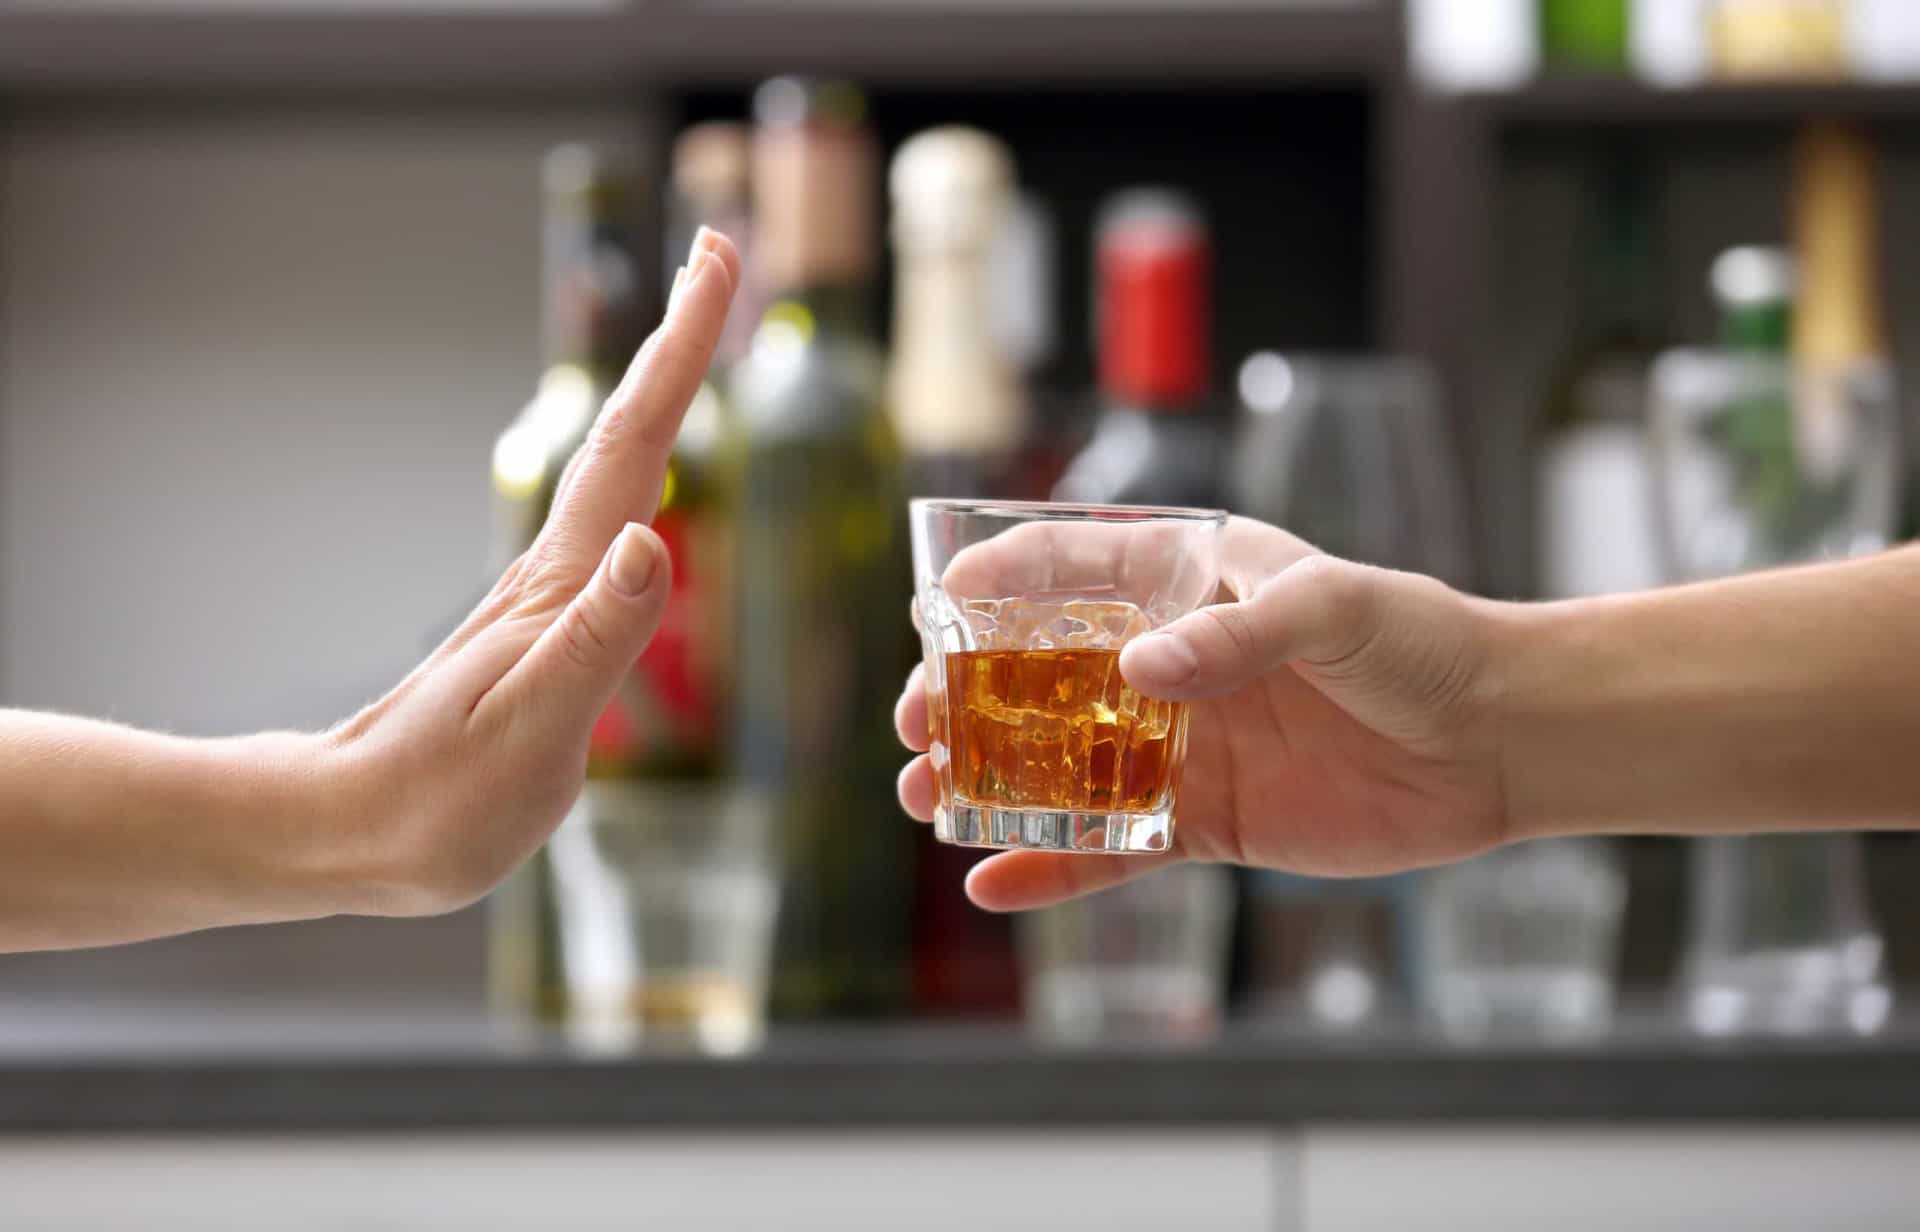 <p><span>Stick to the recommended drinking limit during the week, and include several alcohol-free days. You should try not to go over 14 units in a week.</span></p><p><a href="https://www.msn.com/en-us/community/channel/vid-7xx8mnucu55yw63we9va2gwr7uihbxwc68fxqp25x6tg4ftibpra?cvid=94631541bc0f4f89bfd59158d696ad7e">Follow us and access great exclusive content everyday</a></p>